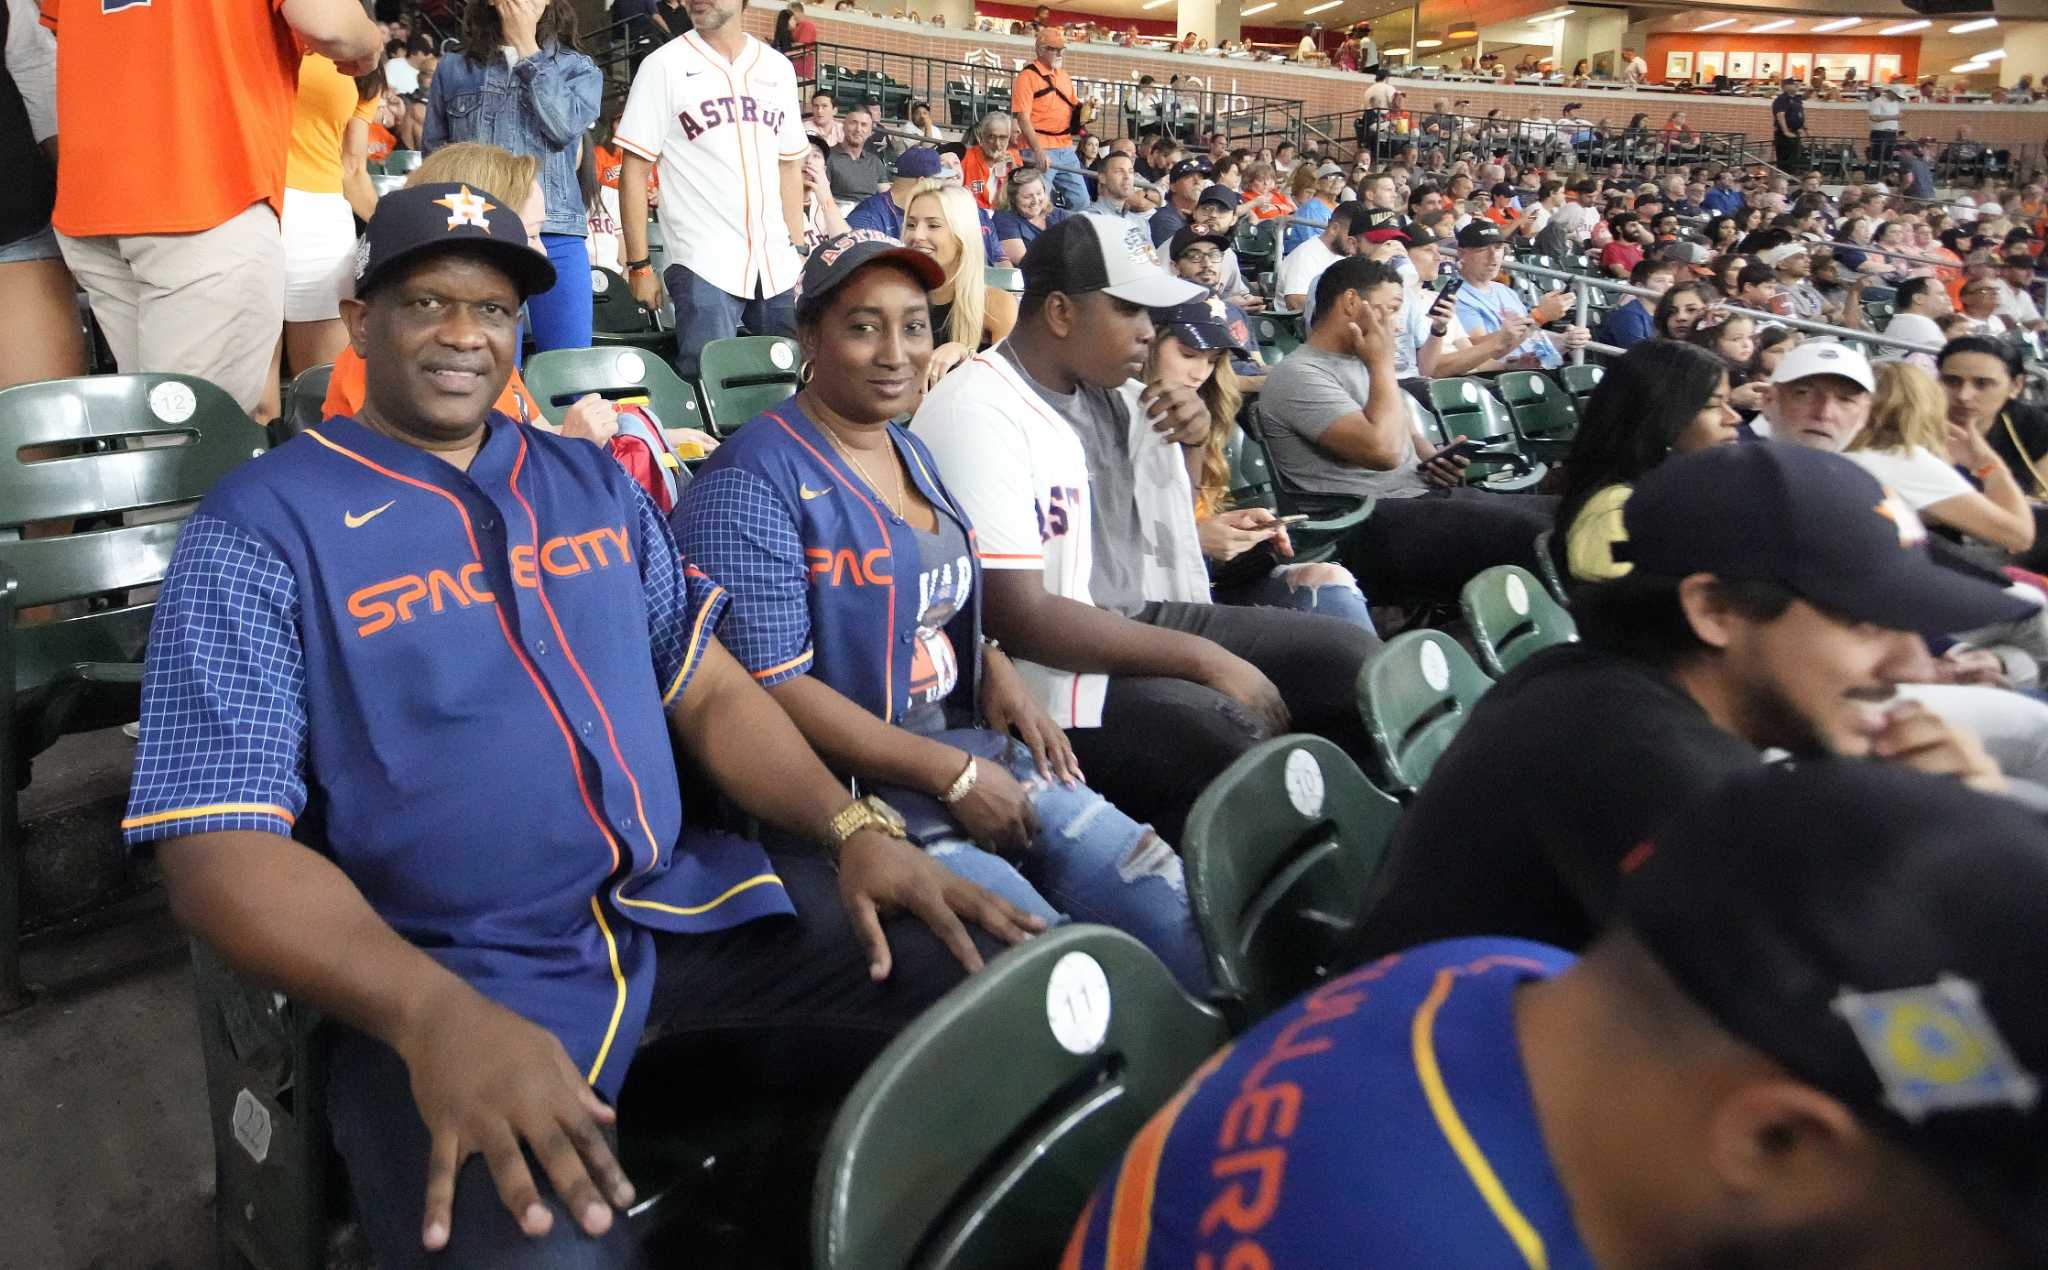 The Texas Rangers banned a fan after a Hispanic family says he harassed  them at a game